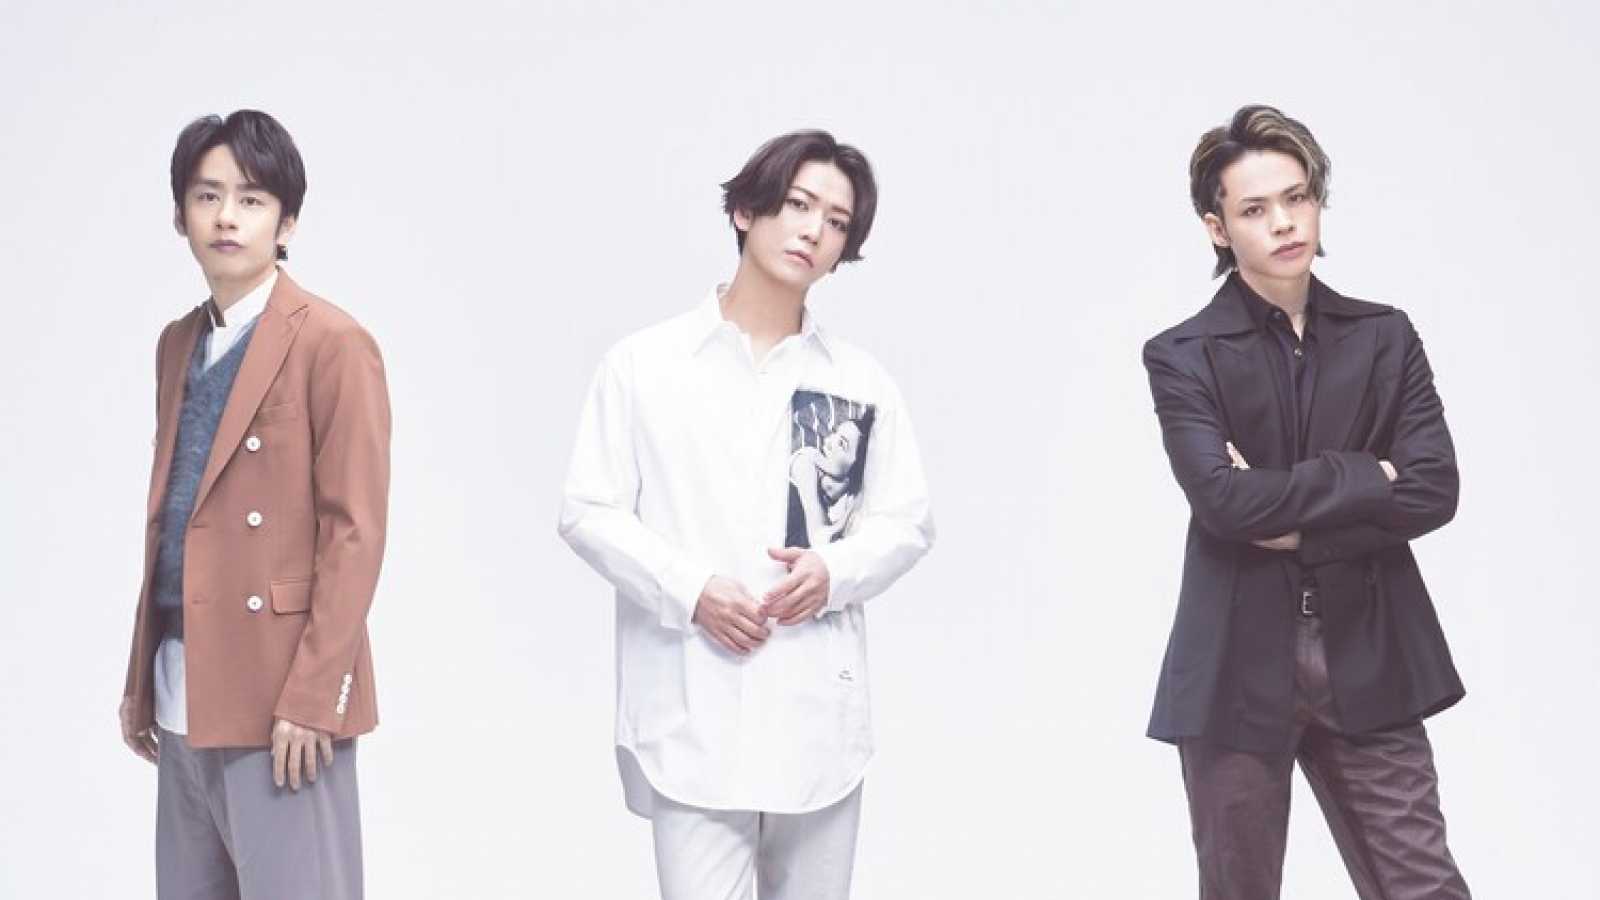 Nowy album KAT-TUN © KAT-TUN. All rights reserved.